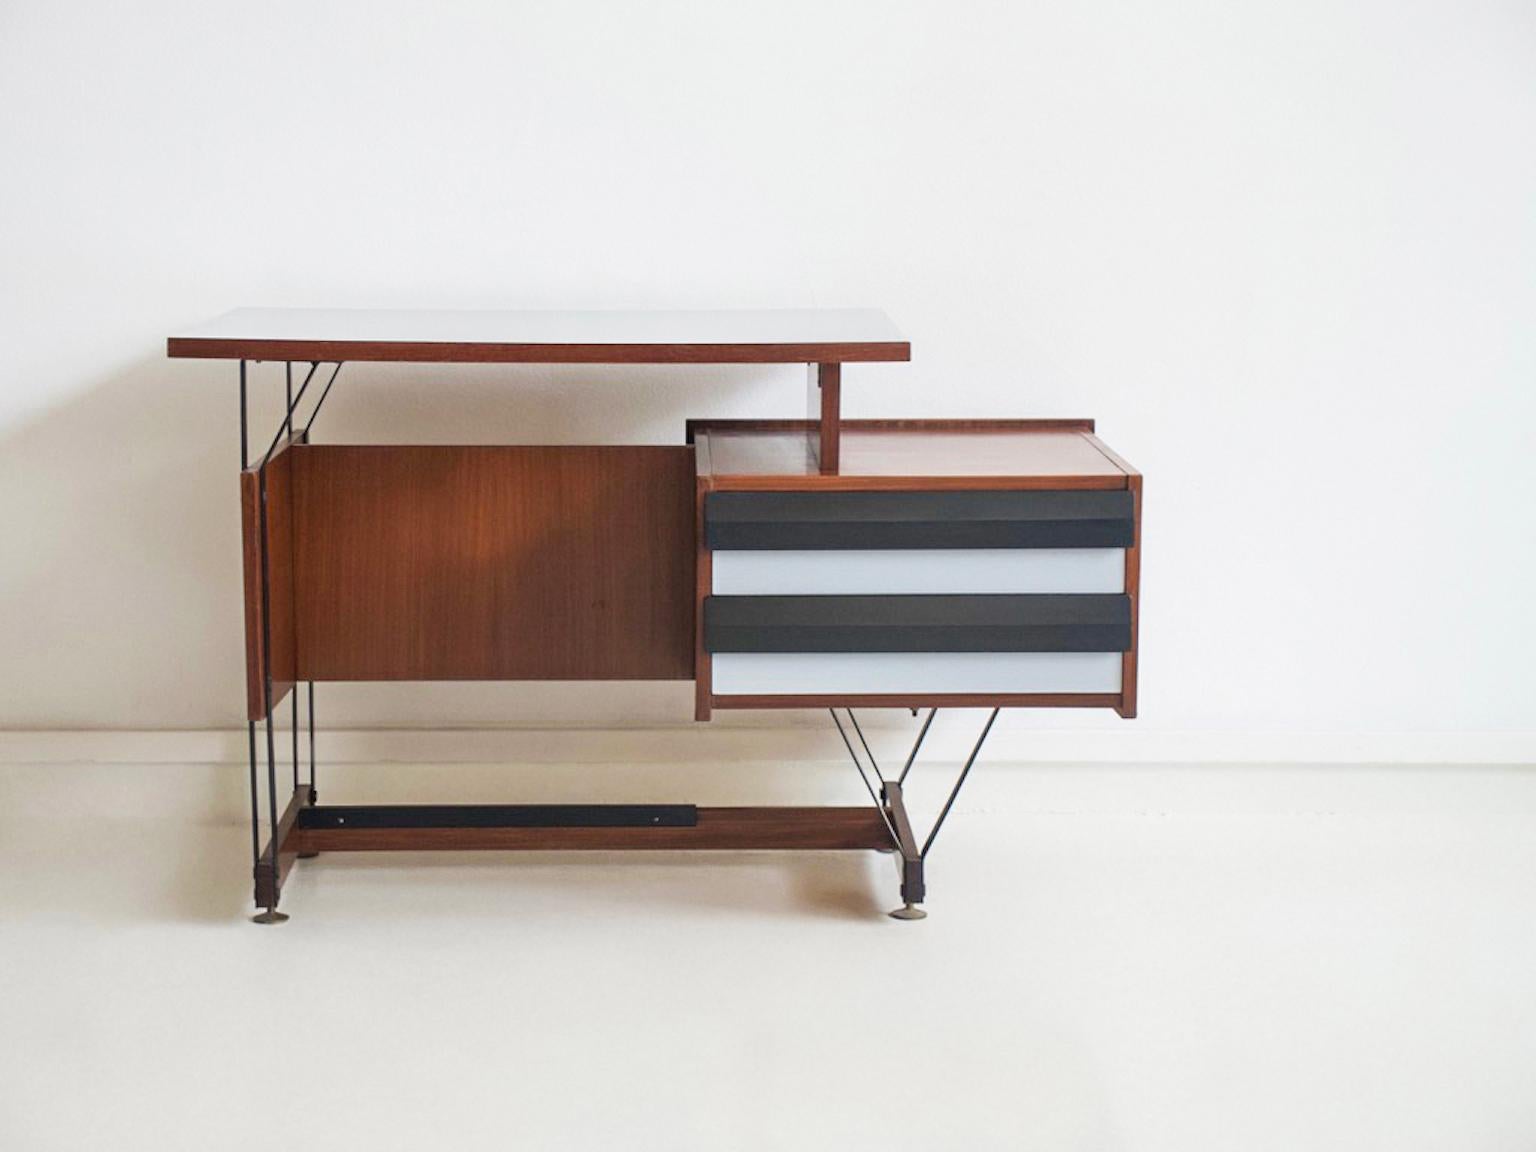 Small writing desk of wood and metal, Formica table top. Front of the two drawers painted in black and white. Made in Italy in the 1960s. Please note some marks on the top and wear on the bottom on one side, pictured.